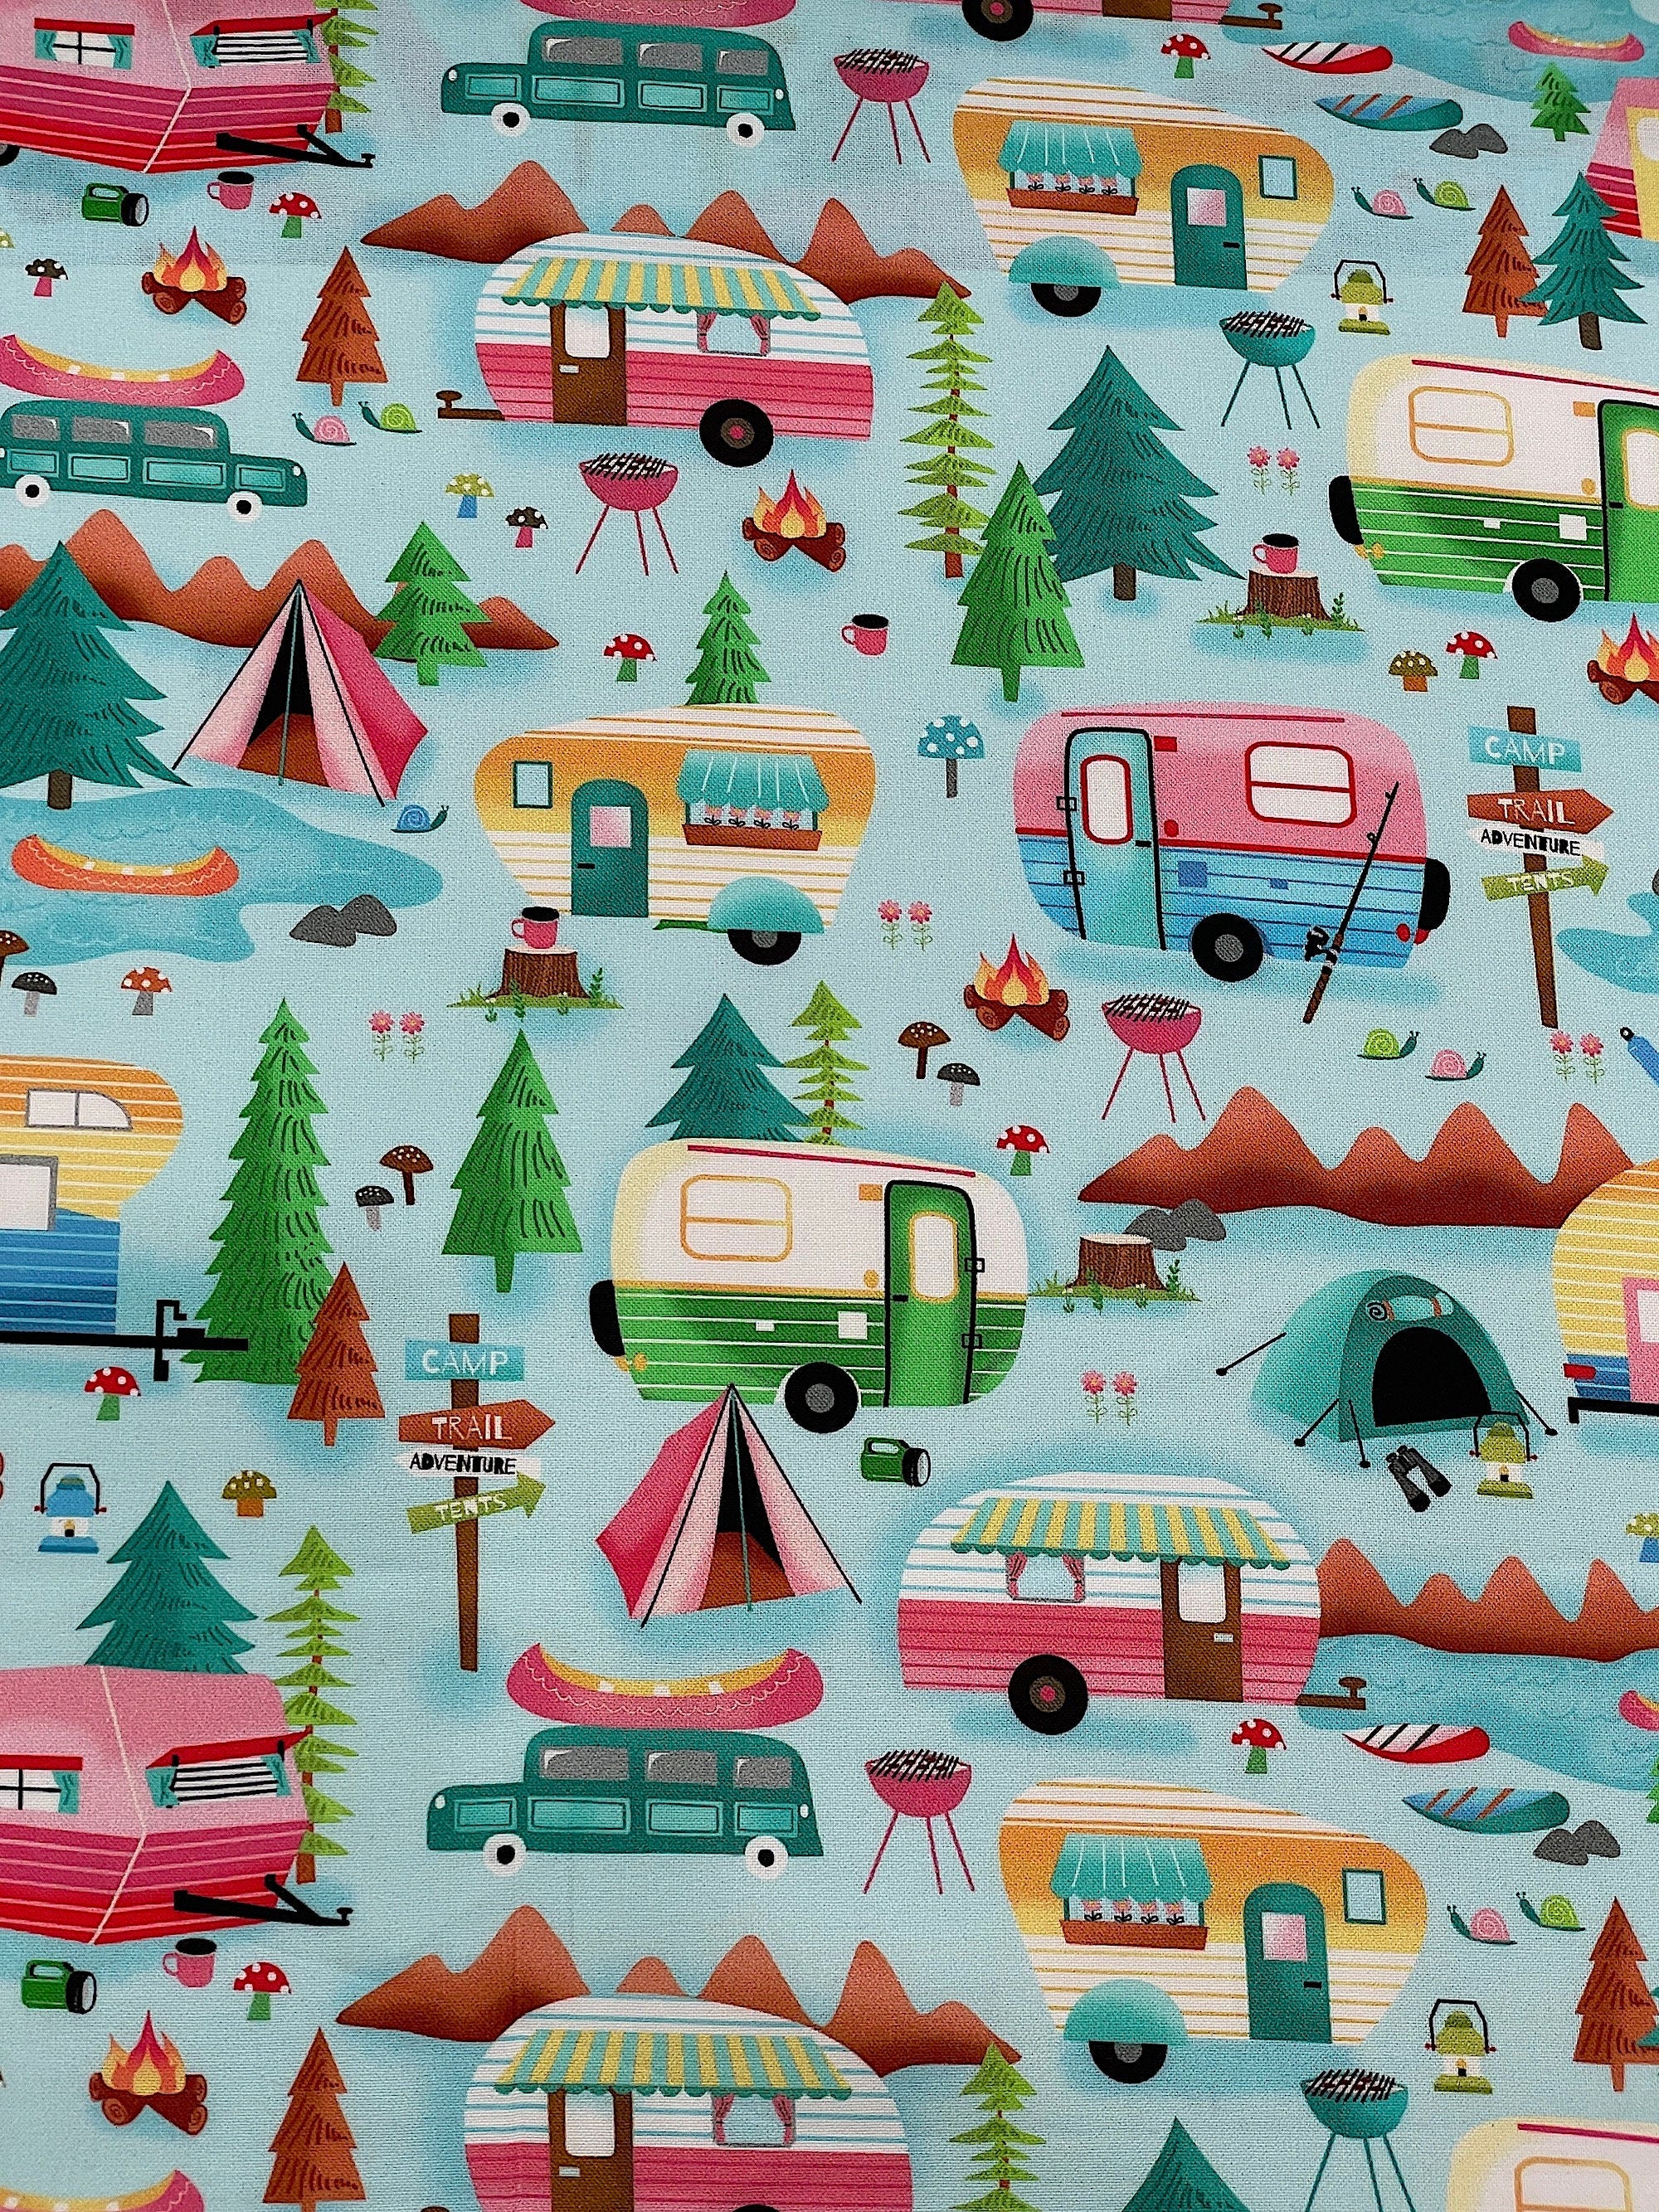 This light blue fabric is covered with a camping scene that consists of travel trailers, trees, tents, campfires, lanterns, canoes, grills, mountains and more.